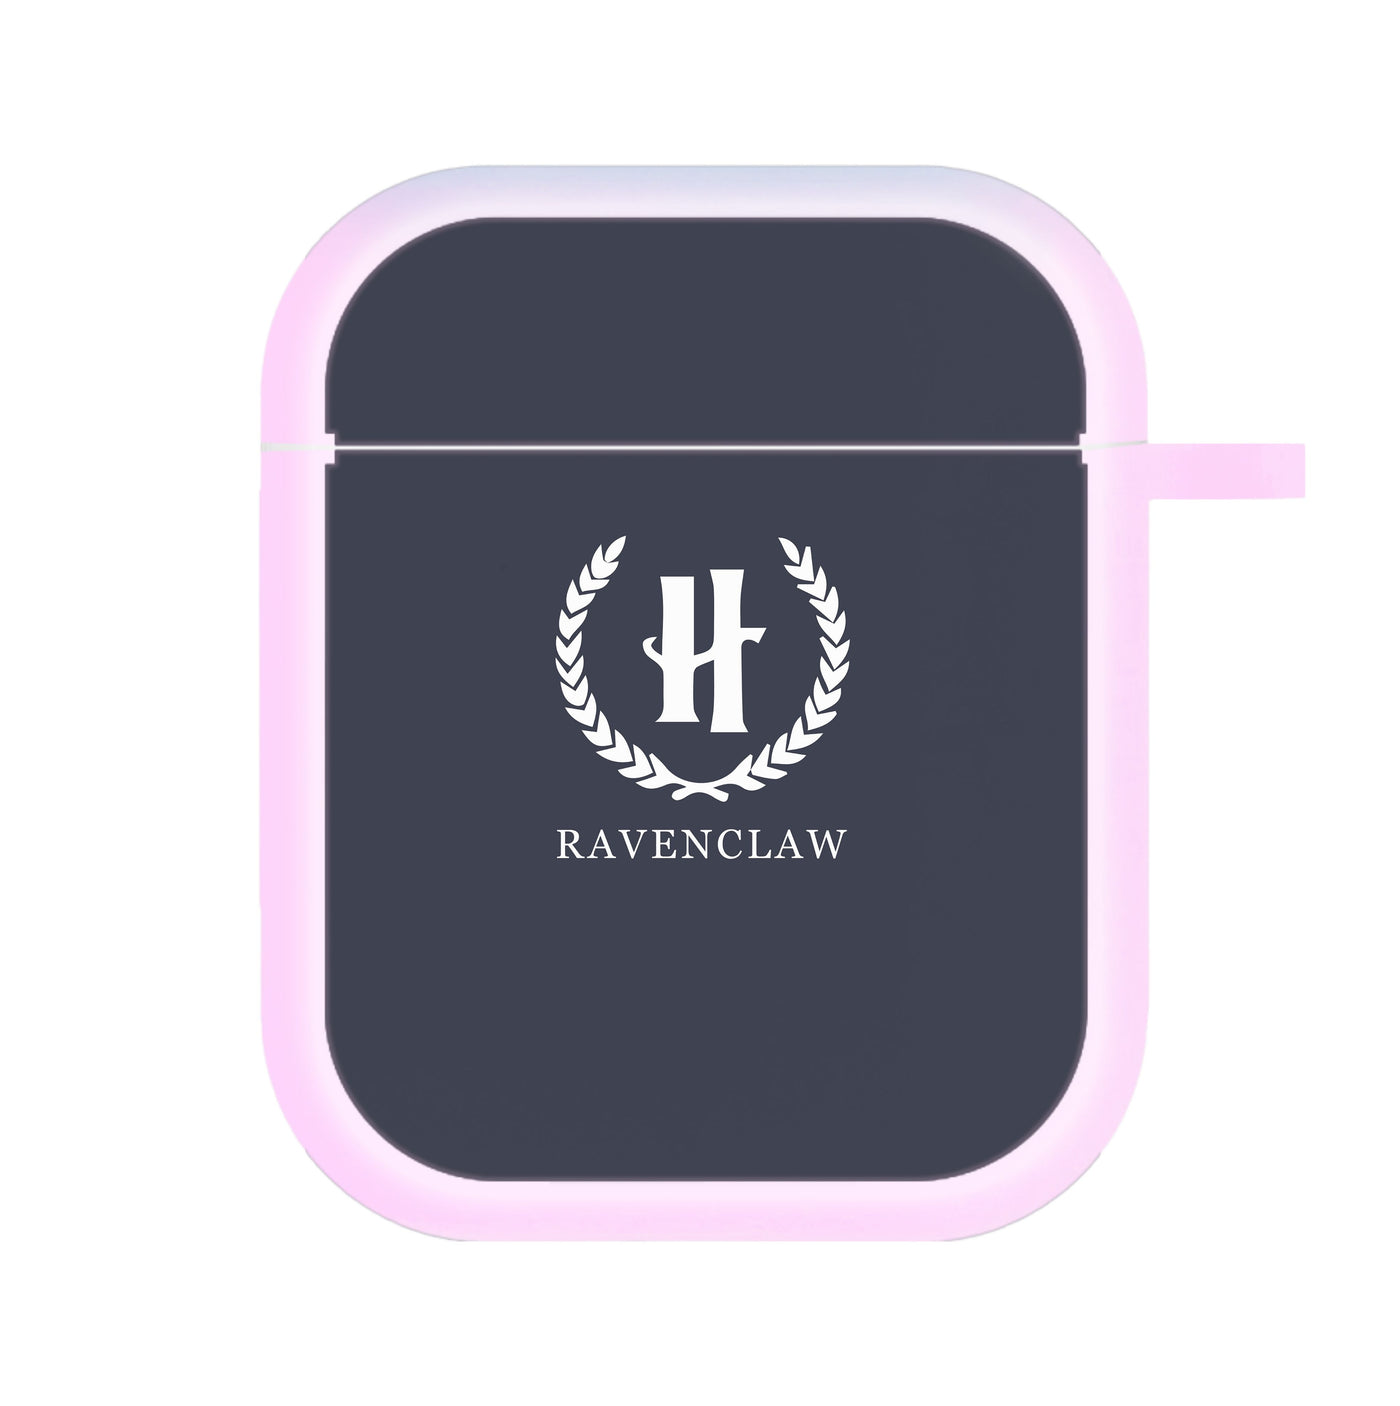 Ravenclaw - Harry Potter AirPods Case